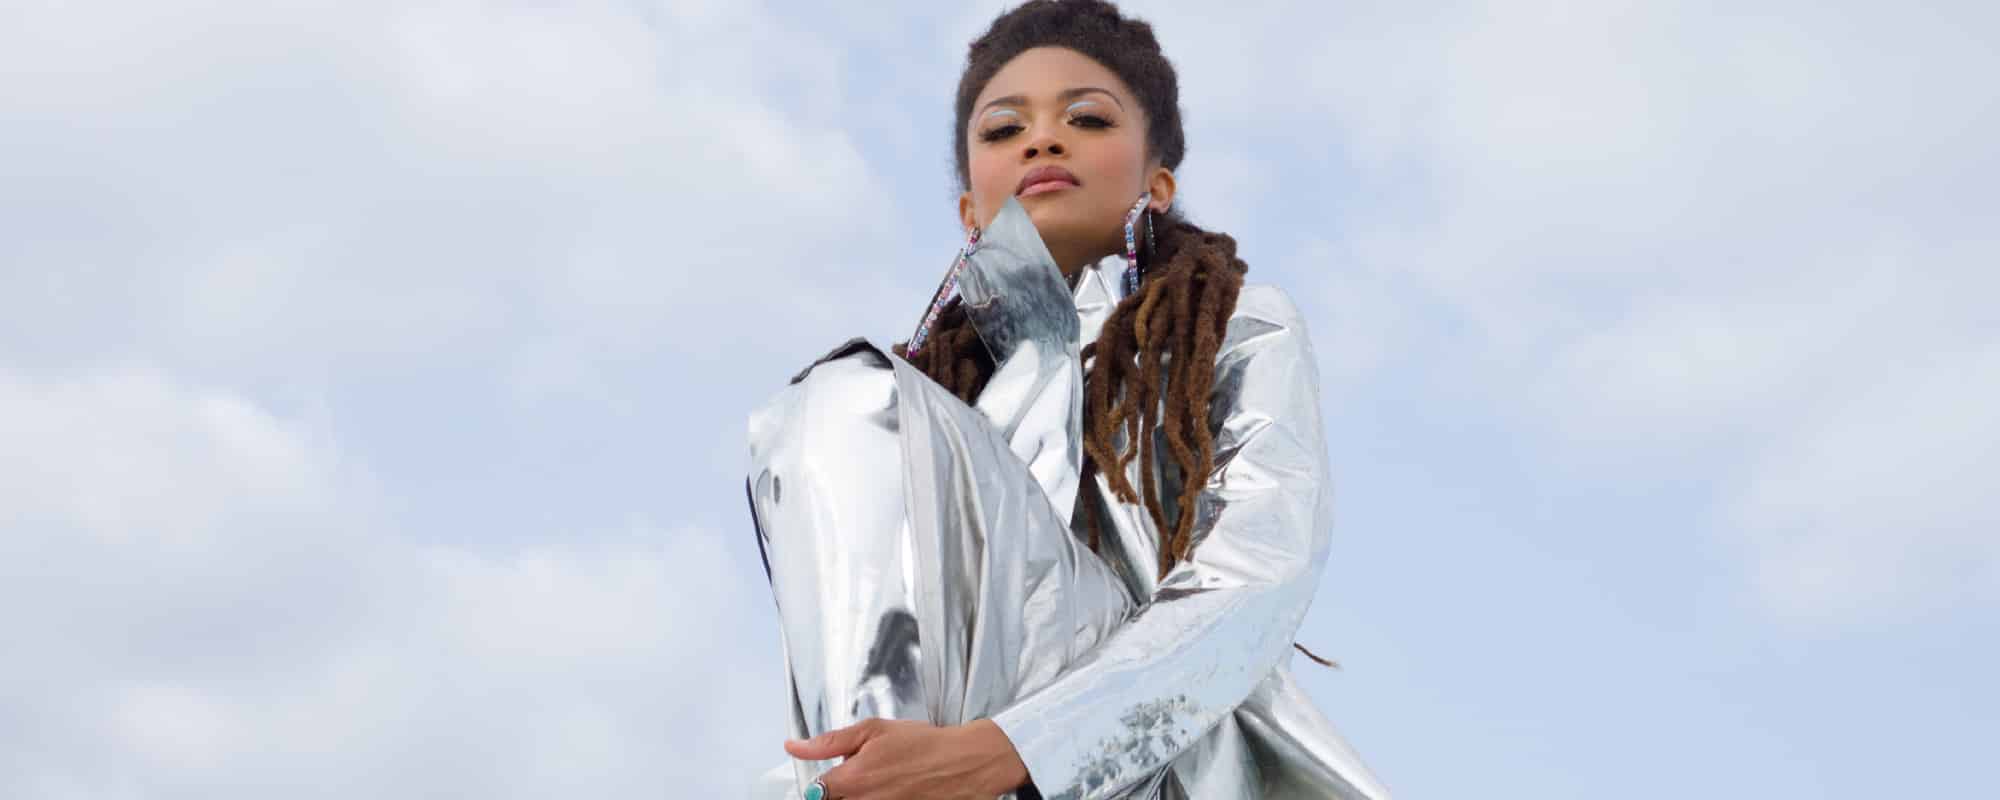 Valerie June to Perform at Pilgrimage Music and Cultural Festival